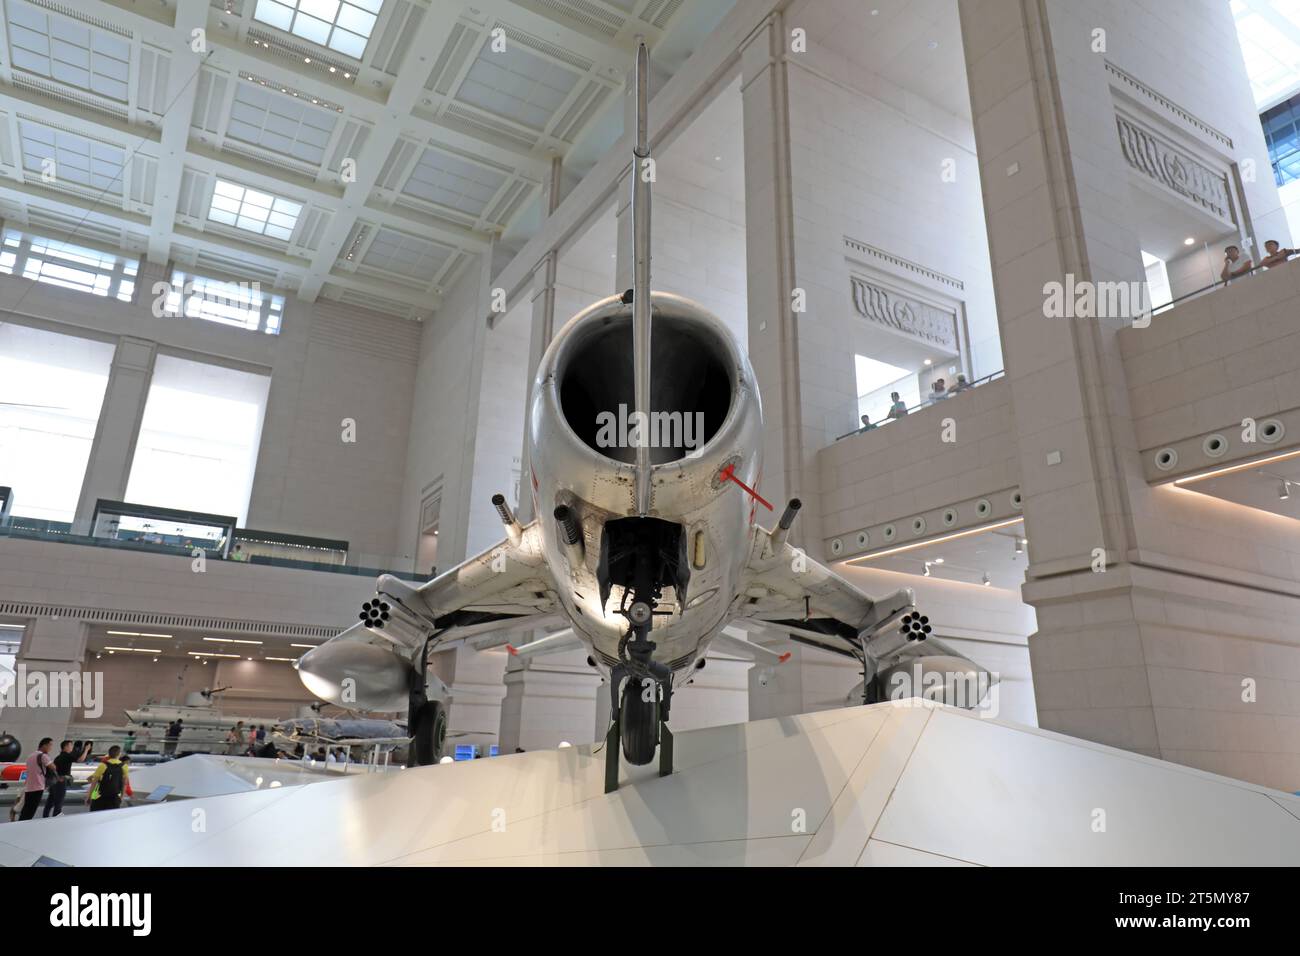 Beijing - June 28, 2019: Chinese-made fighter aircraft, Chinese People's Revolutionary Military Museum, Beijing, China Stock Photo